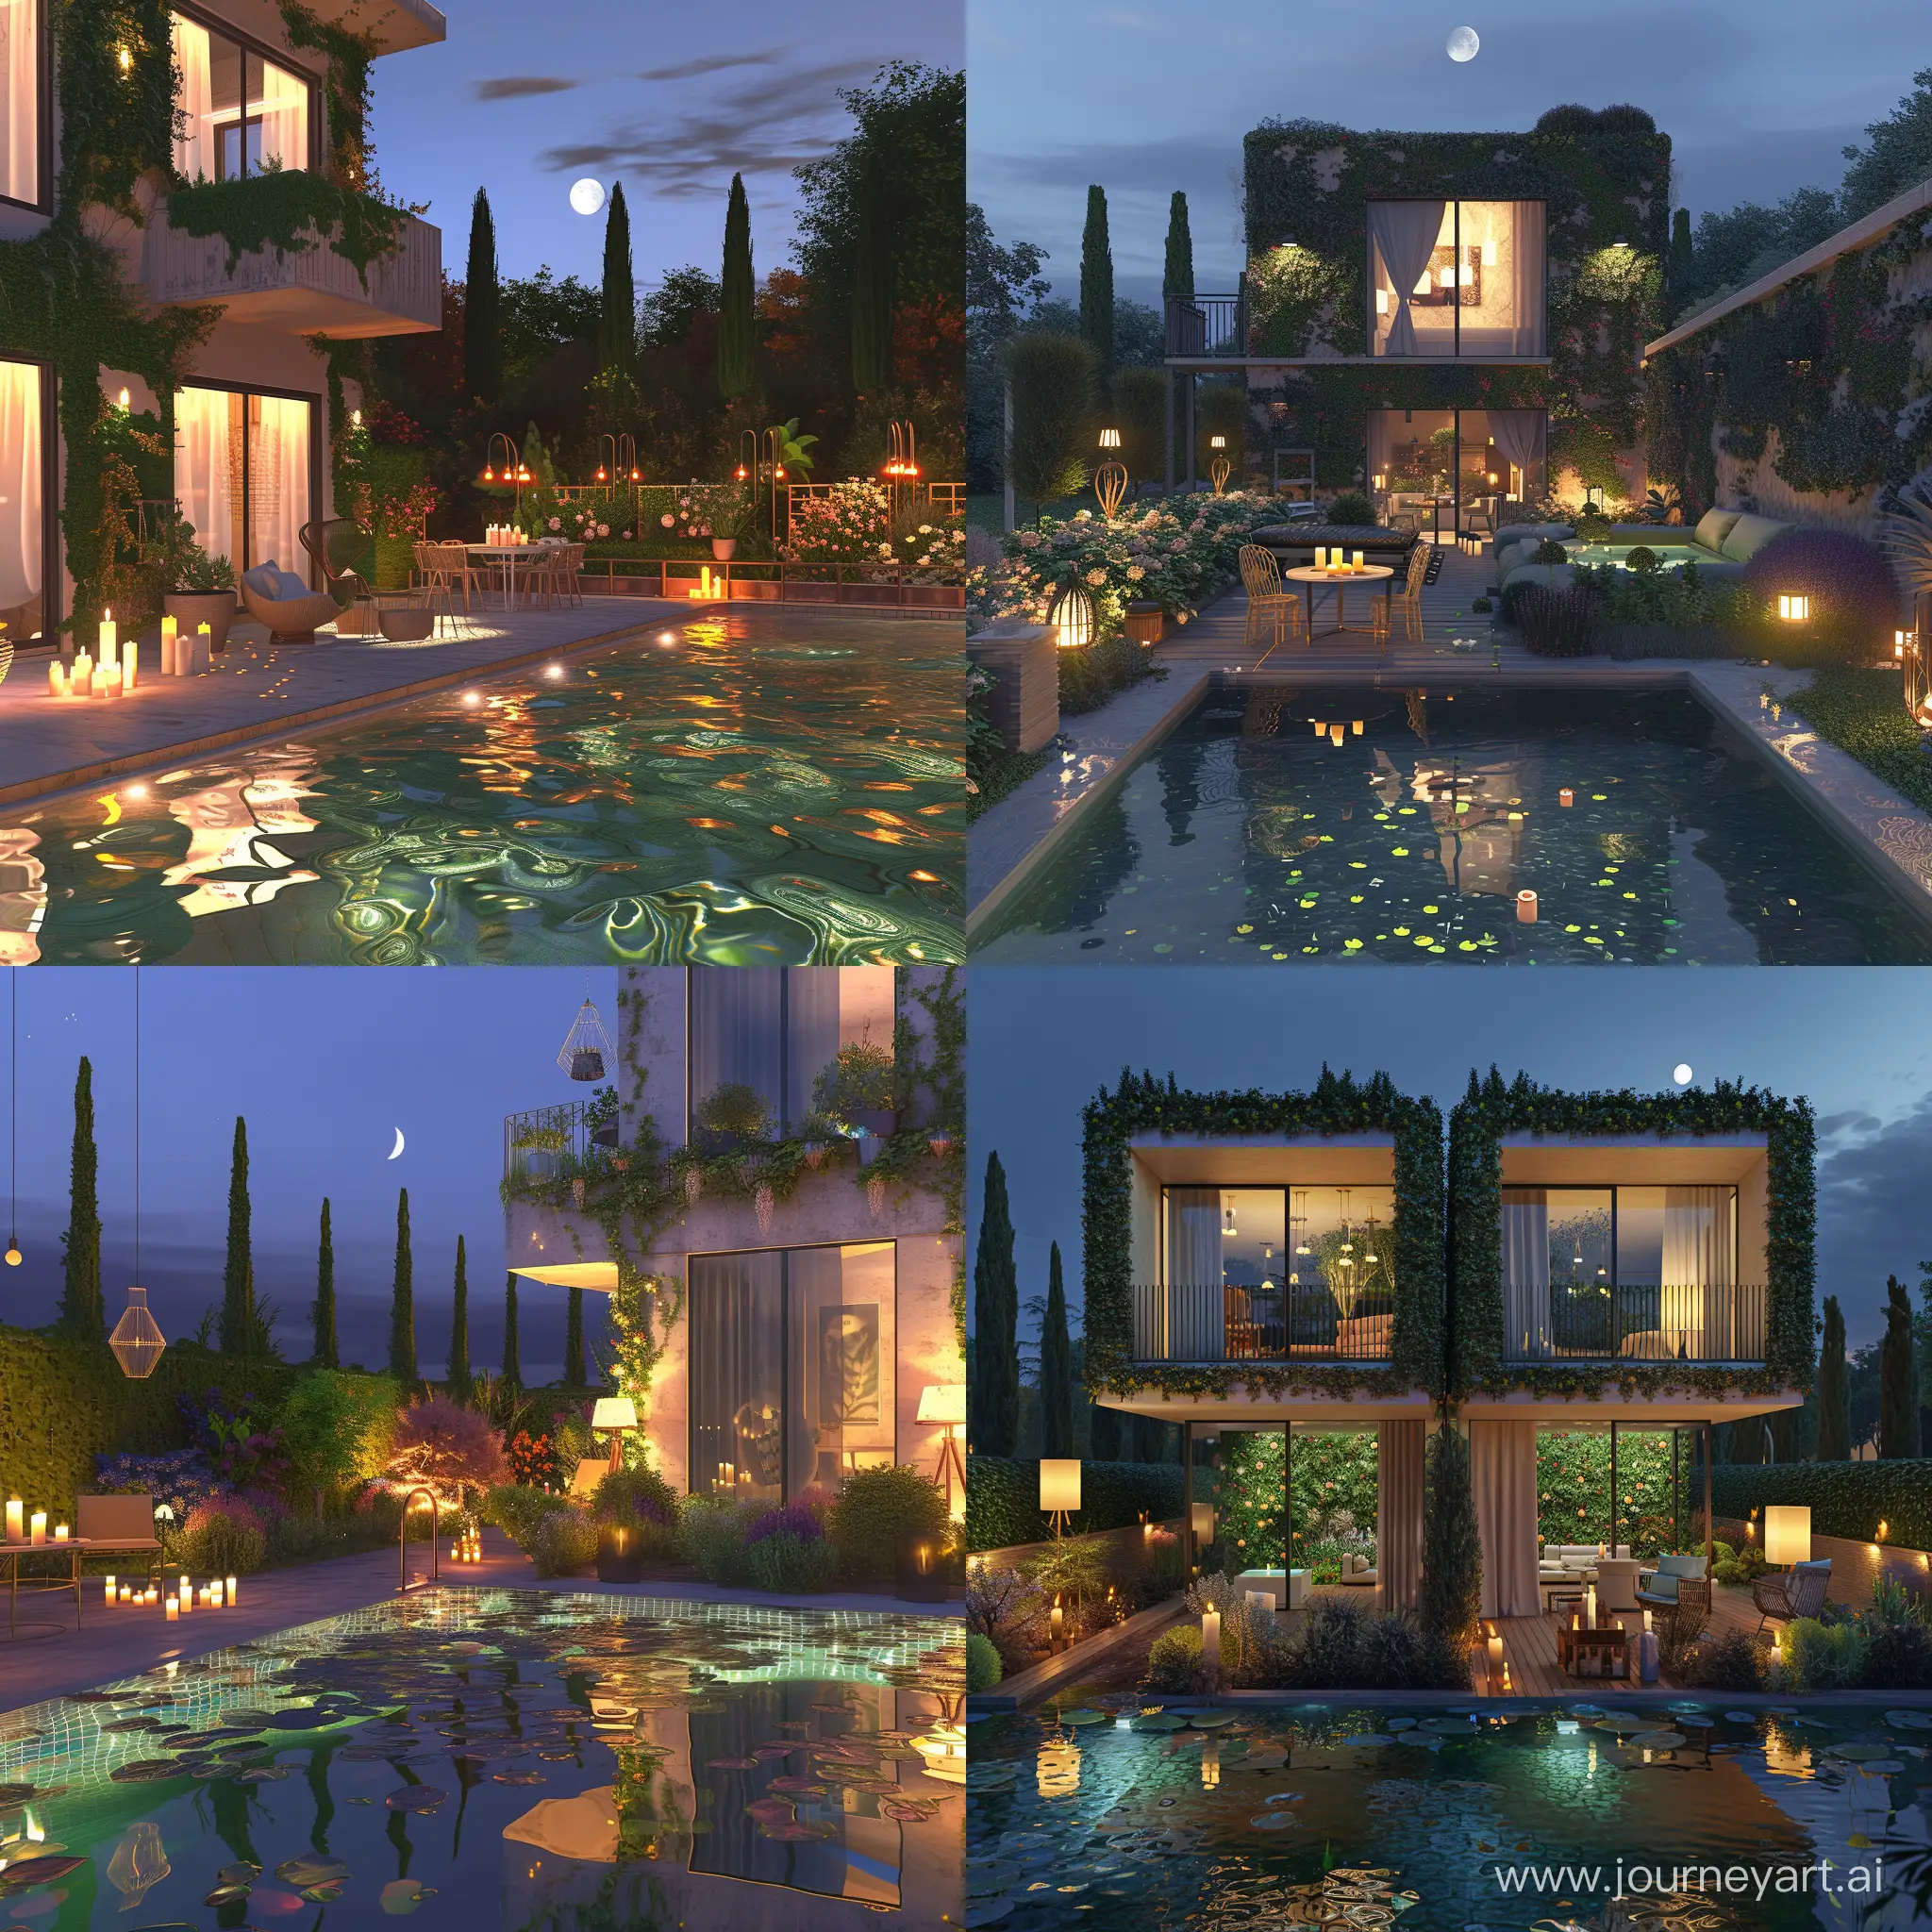 Original racourse a two-stage modern house at night with a practical modern ivy on the walls. backyard, with a botanical garden and a little swimming pool. near the pool there is a little table with candles and chairs. in the background there is a beautiful fence with cypresses and flower beds. the pool has beautiful clear water with reflections and with the backlight. there are a lot of desighned lamps around. beautiful sky with a moon. 8k, rtx, unreal engine 5 render, smooth details